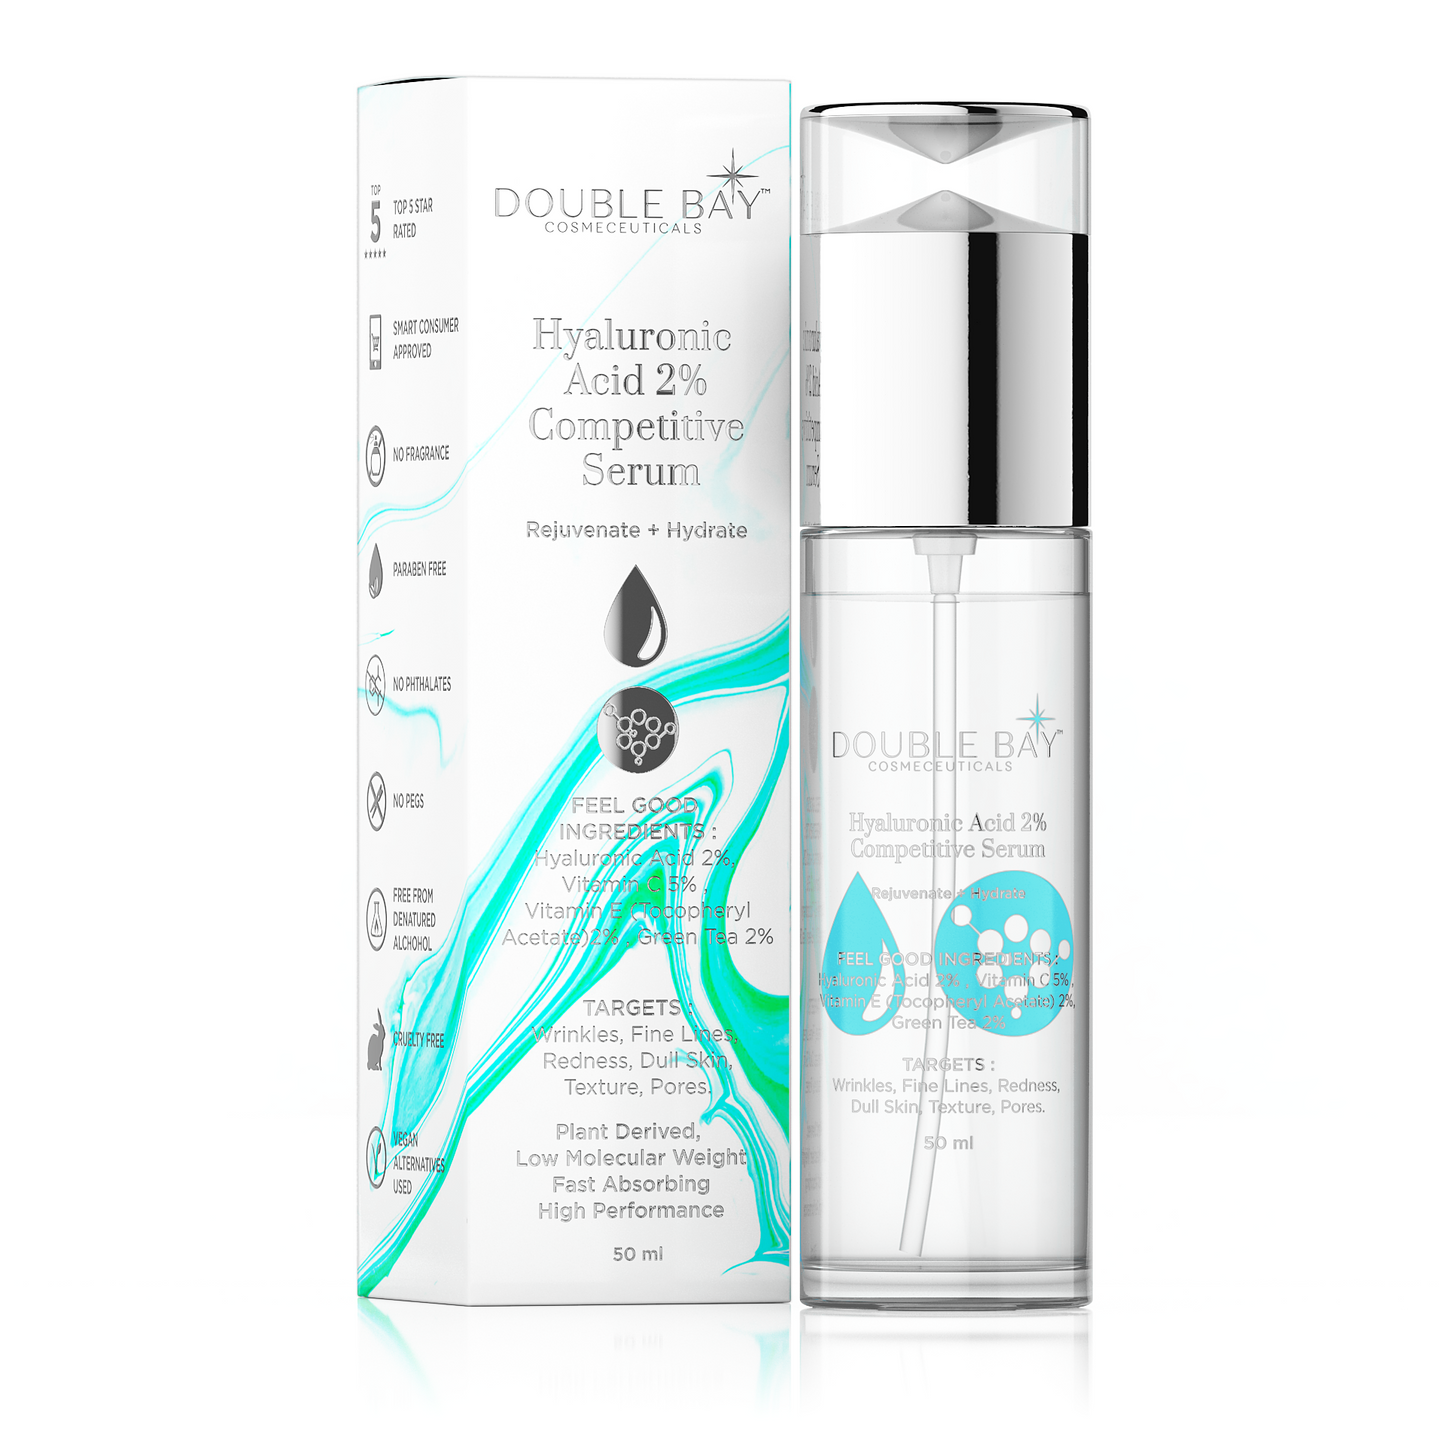 Hyaluronic Acid 2% Competitive Serum